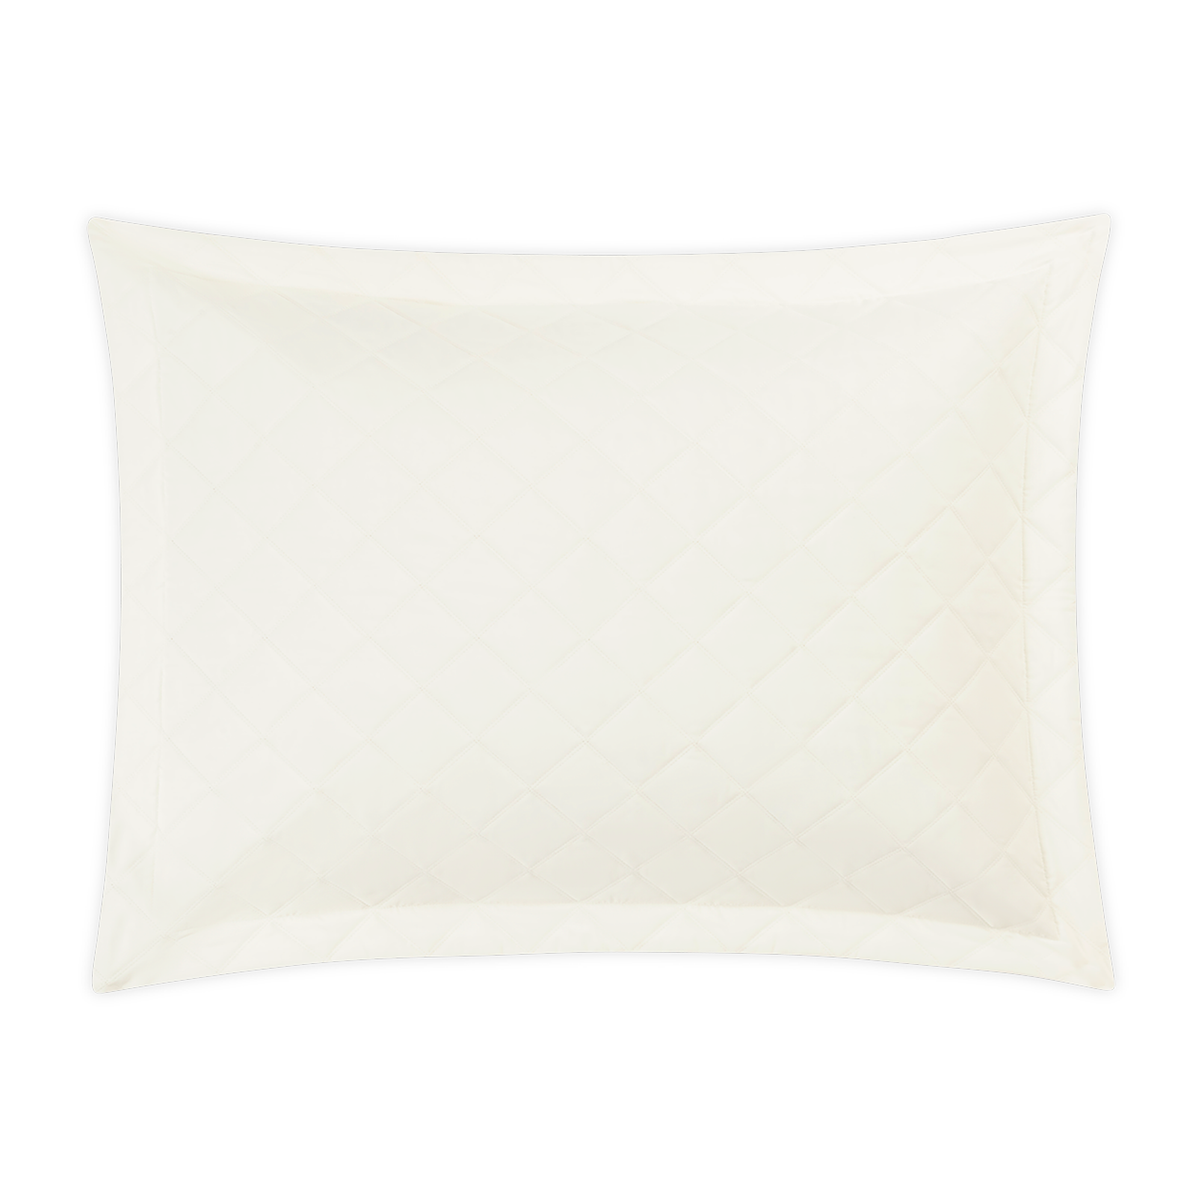 Sham of Matouk Milano Quilt Bedding in Color Ivory